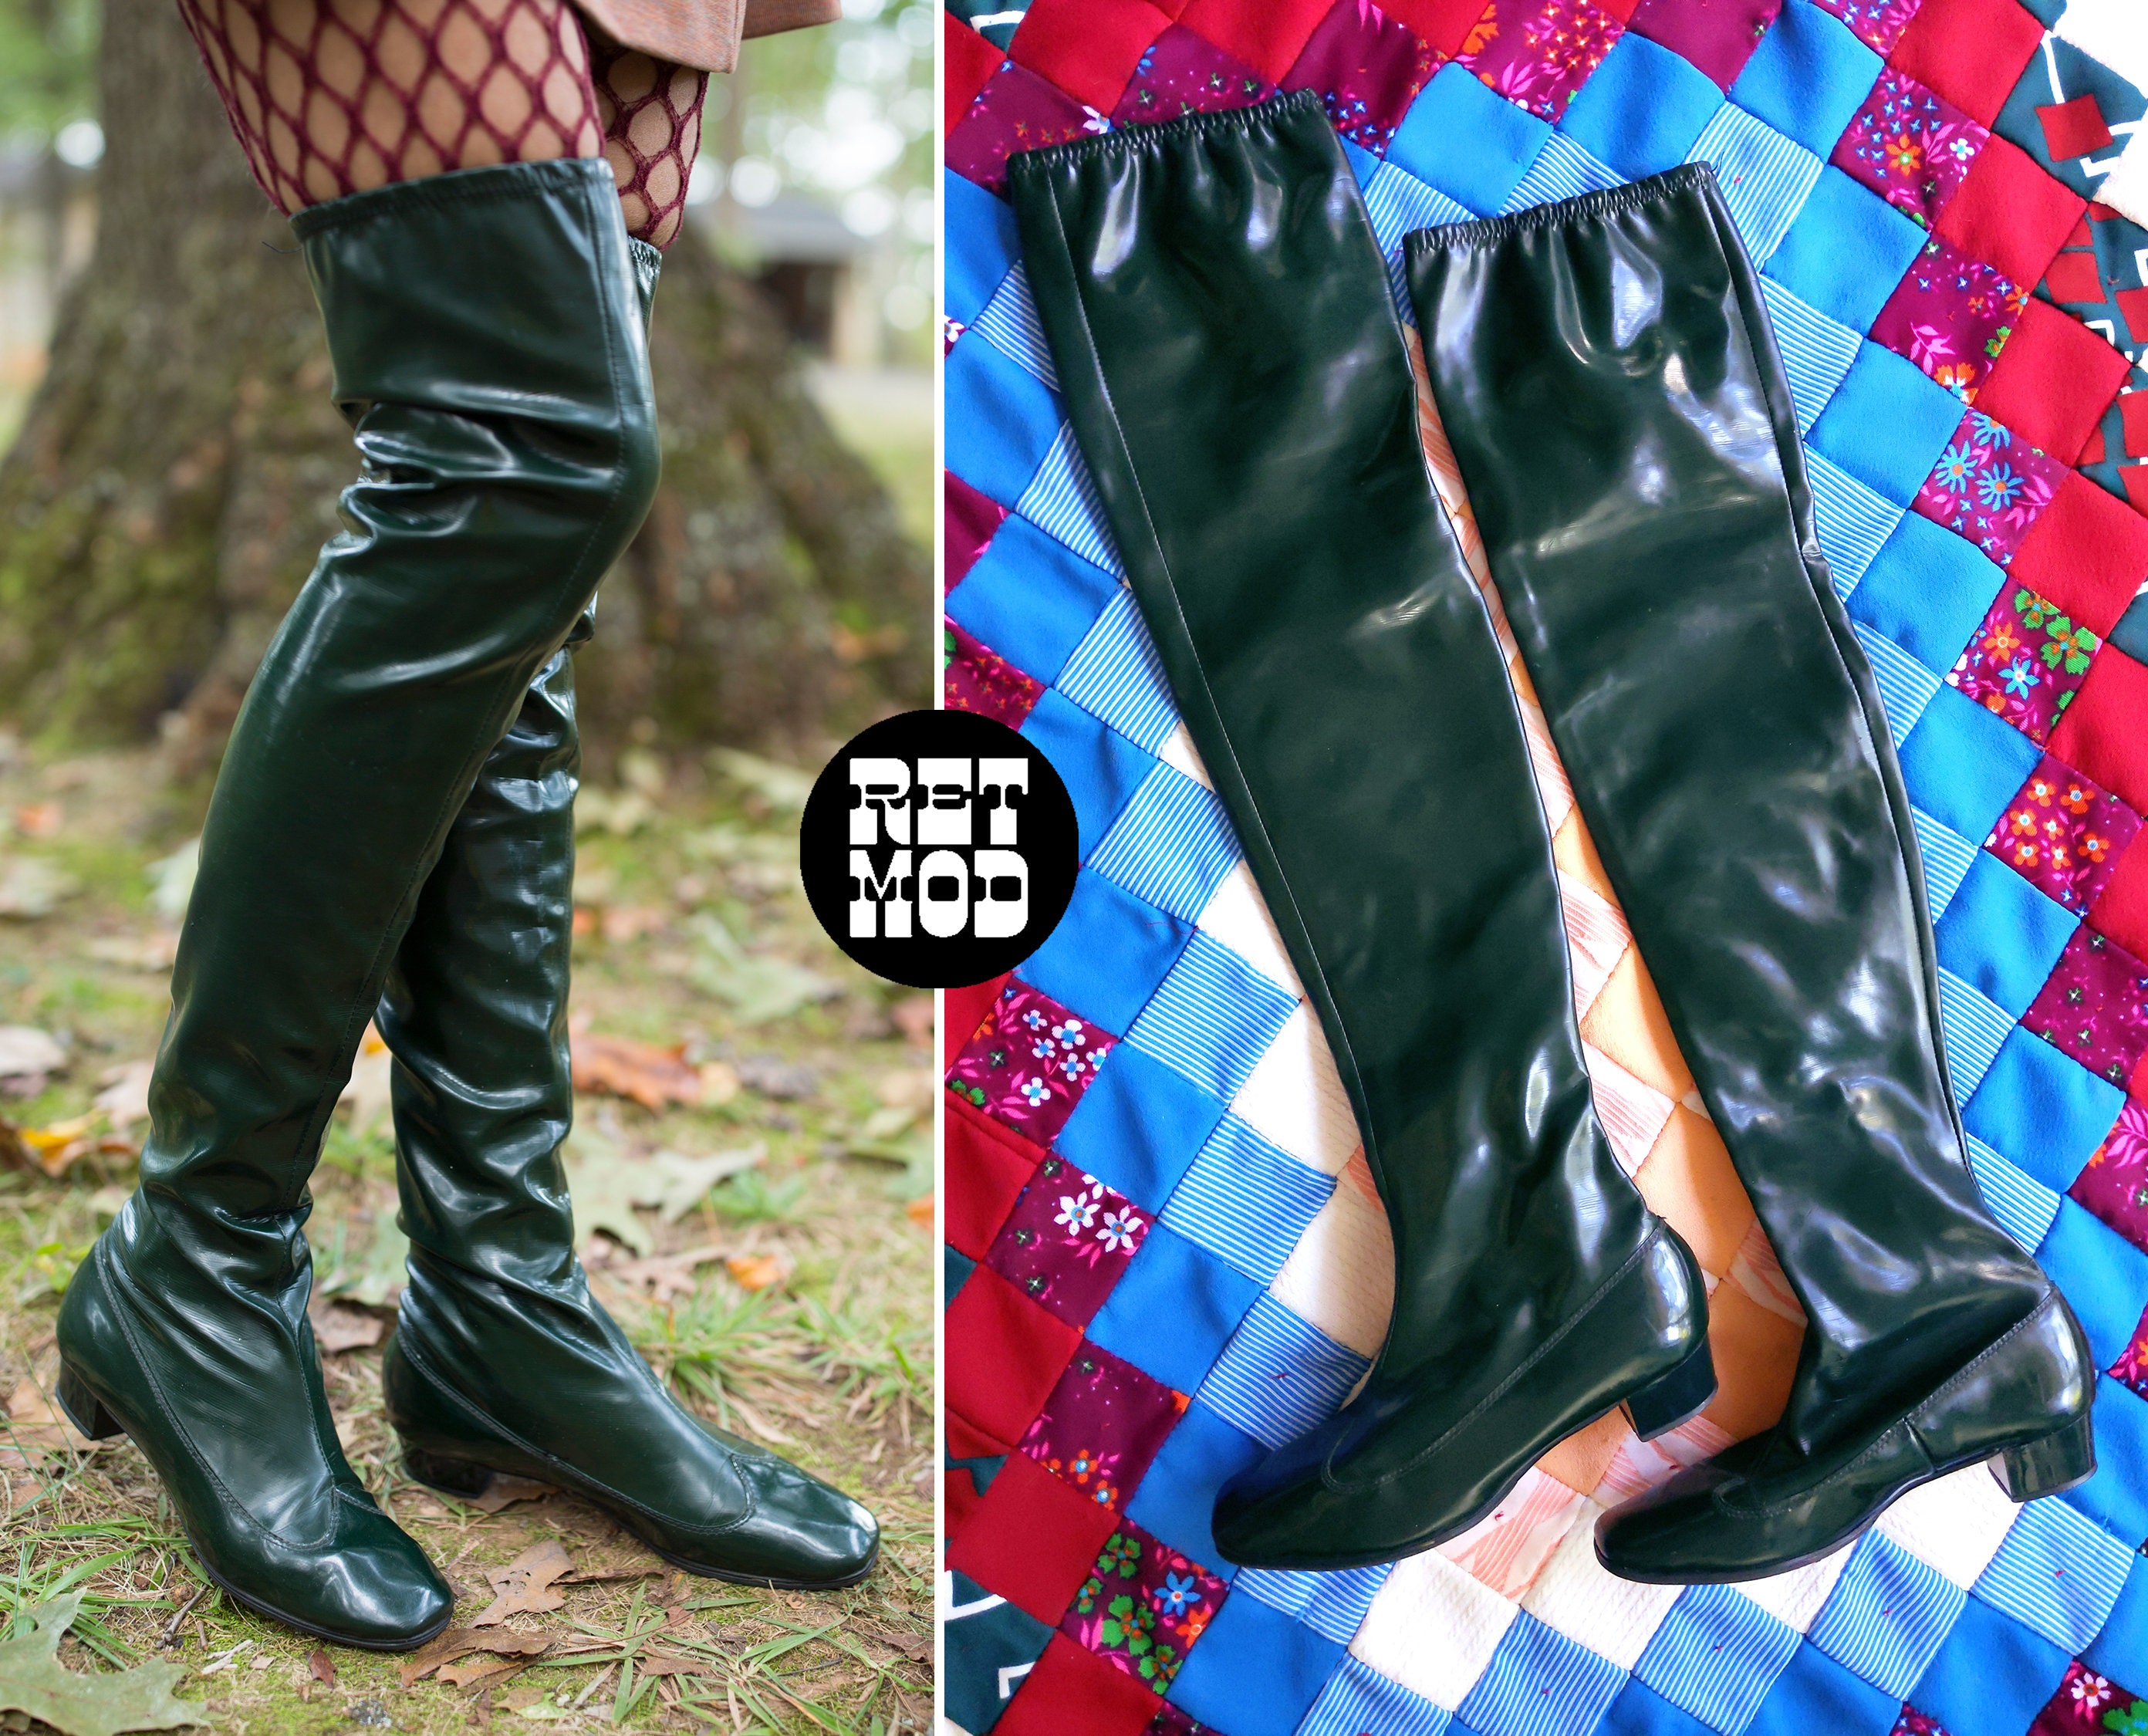 Enzo Angiolini Over The Knee Boots